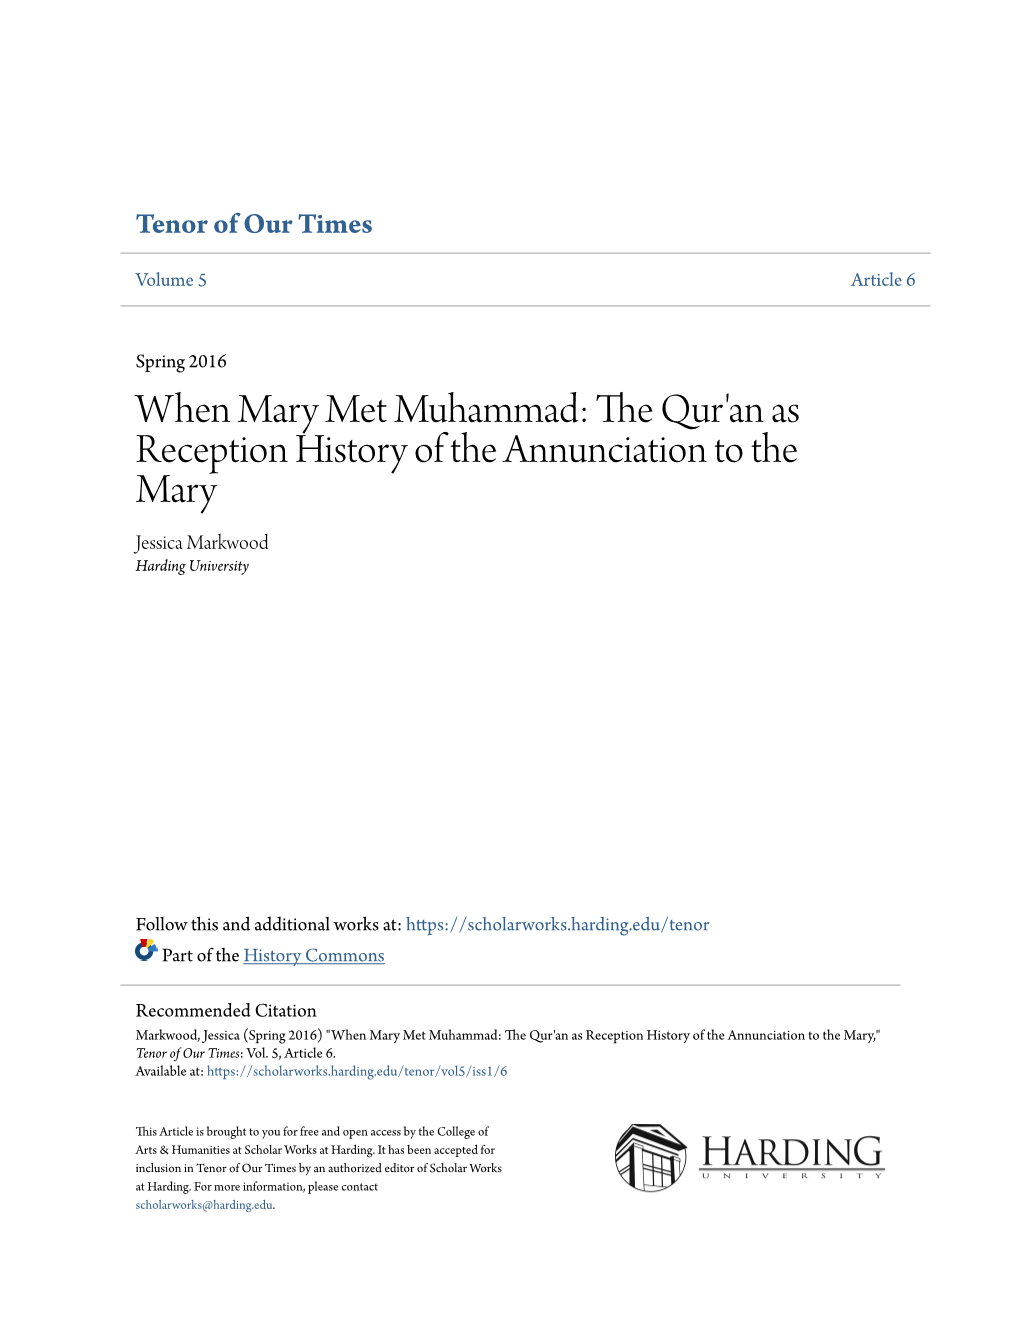 When Mary Met Muhammad: the Qur'an As Reception History of the Annunciation to the Mary Jessica Markwood Harding University